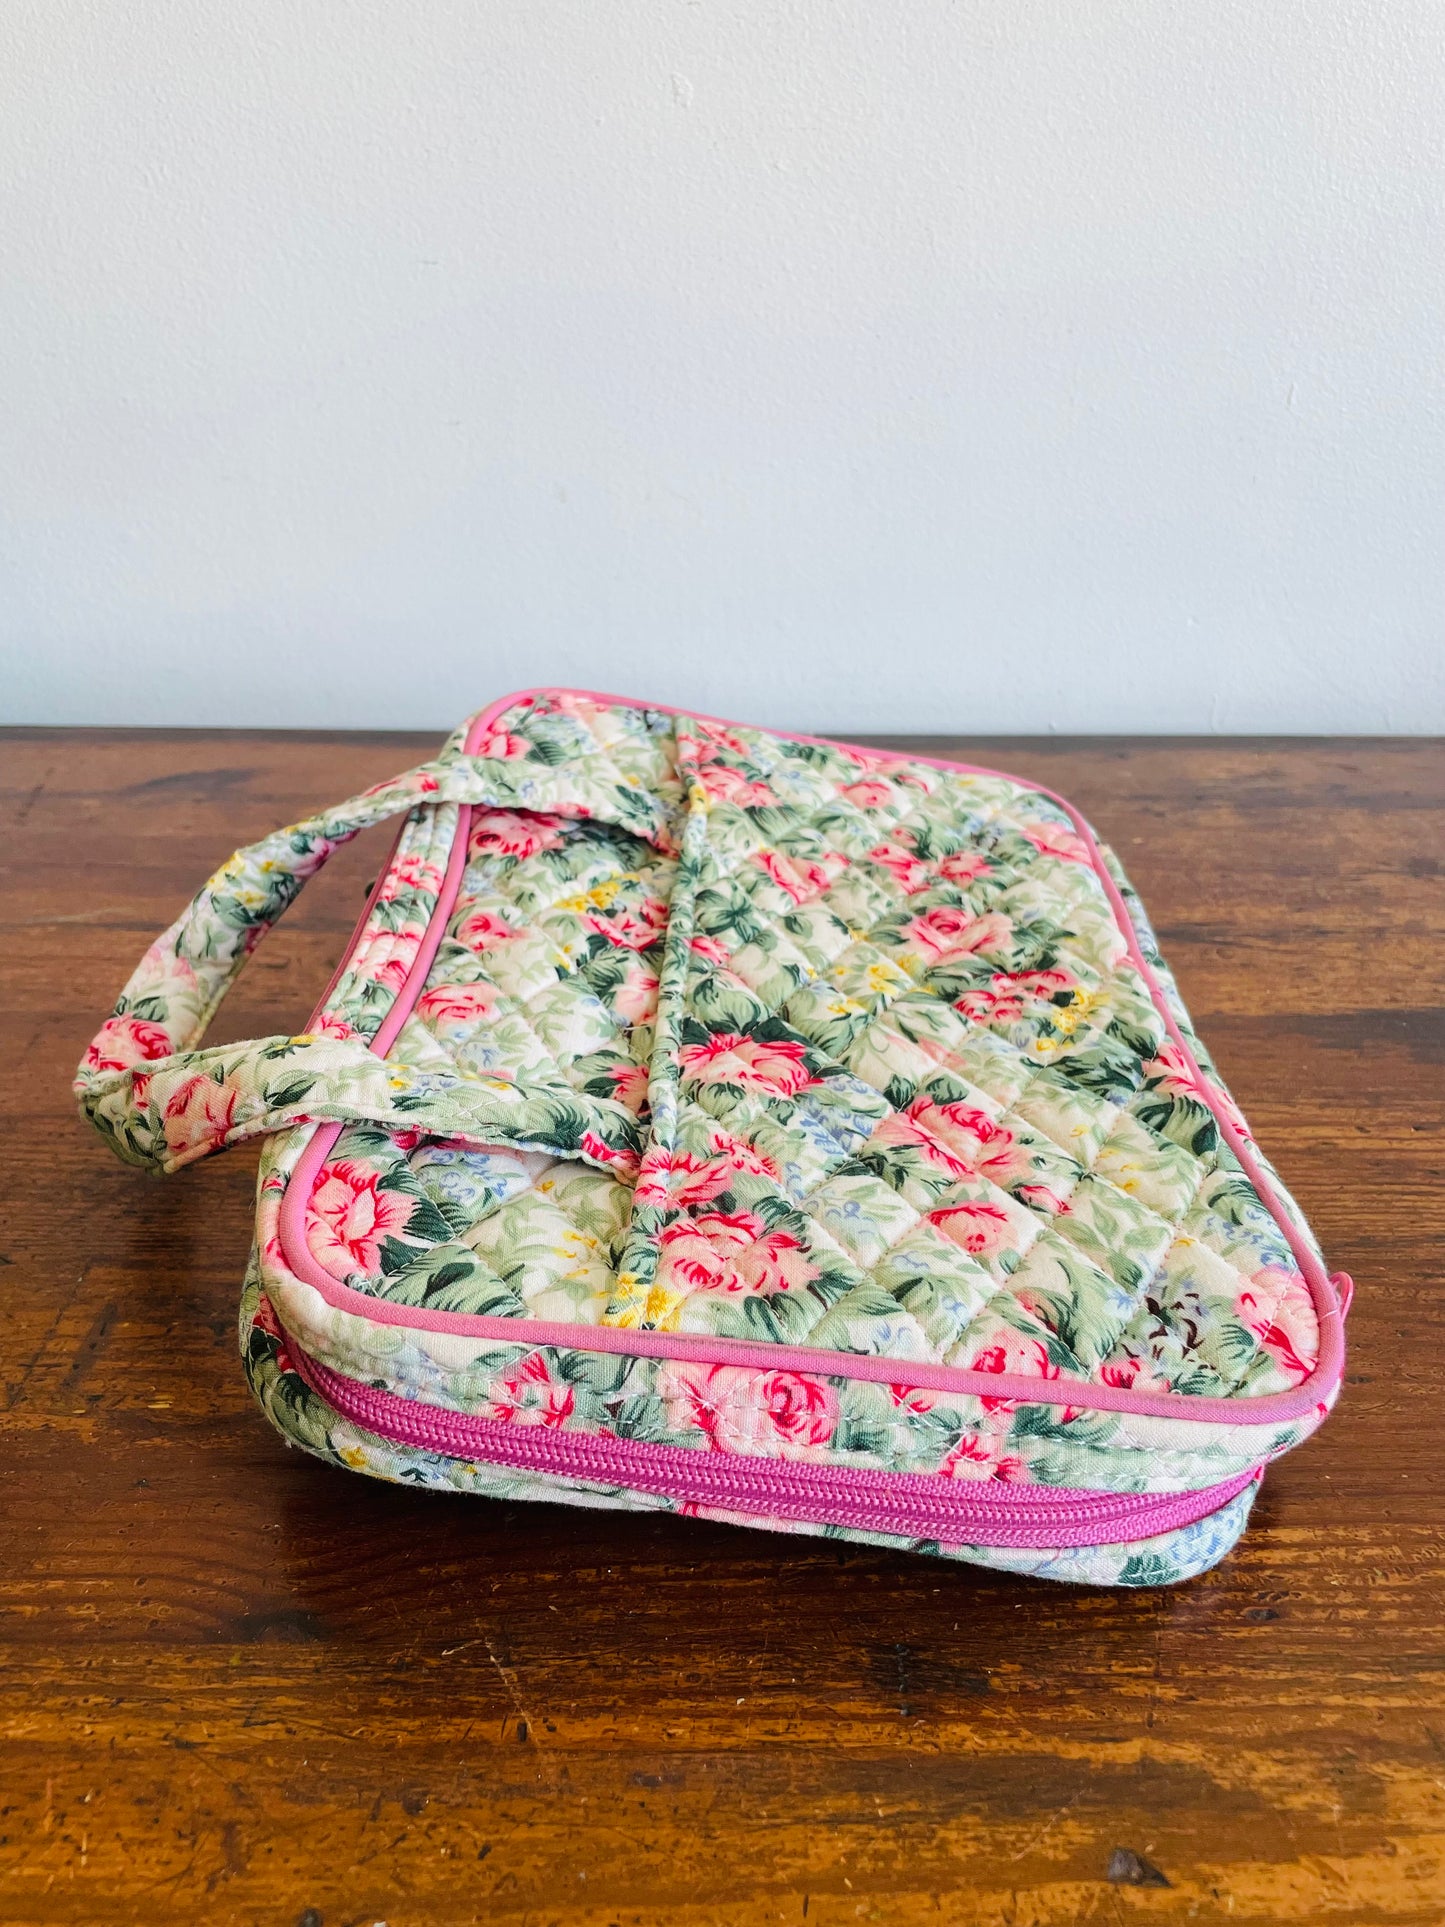 Quilted Floral Fabric Travel Case with Interior Compartments - Great for Jewellery, Makeup, Toiletries, Etc.!